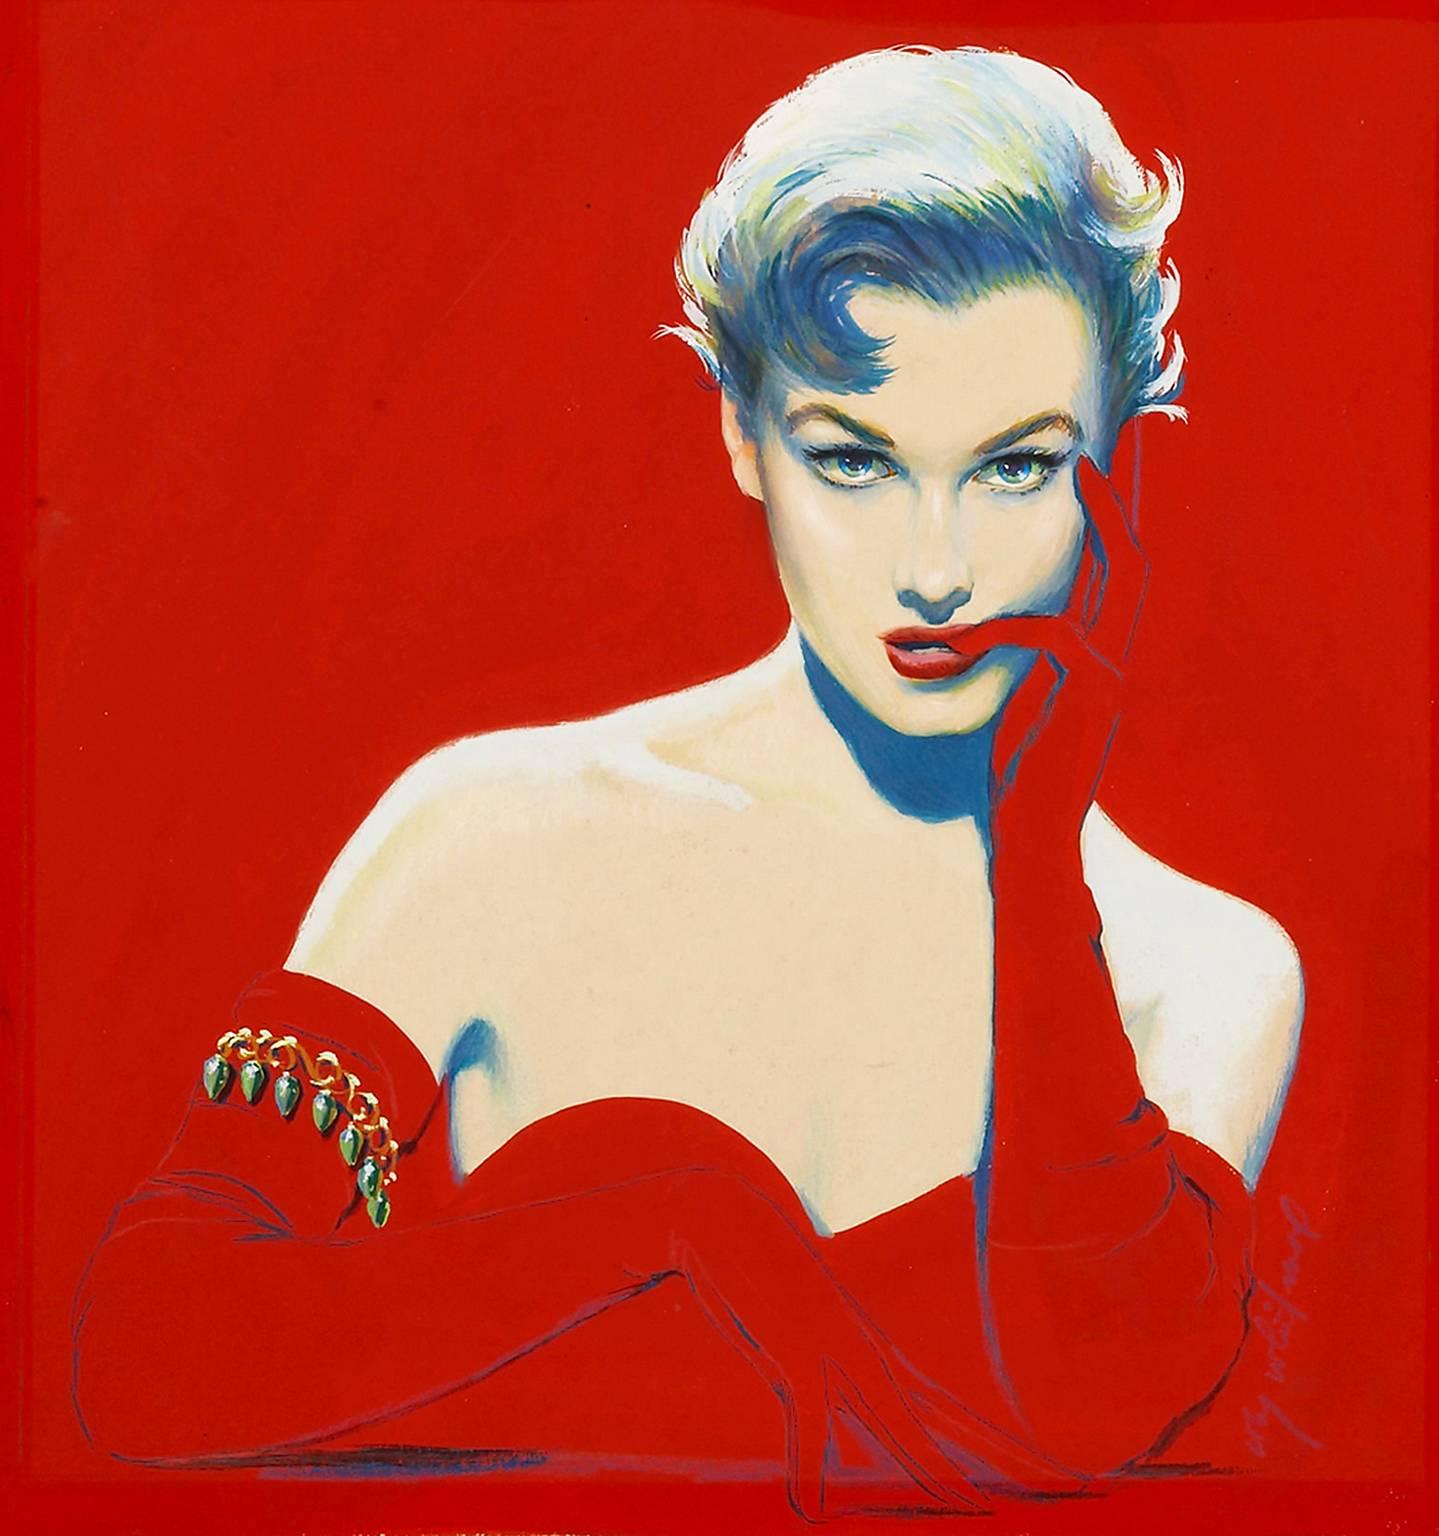 Coby Whitmore Portrait Painting - Seductive Femme Fatale Kim Novak Look-a-like Illustration in Red  